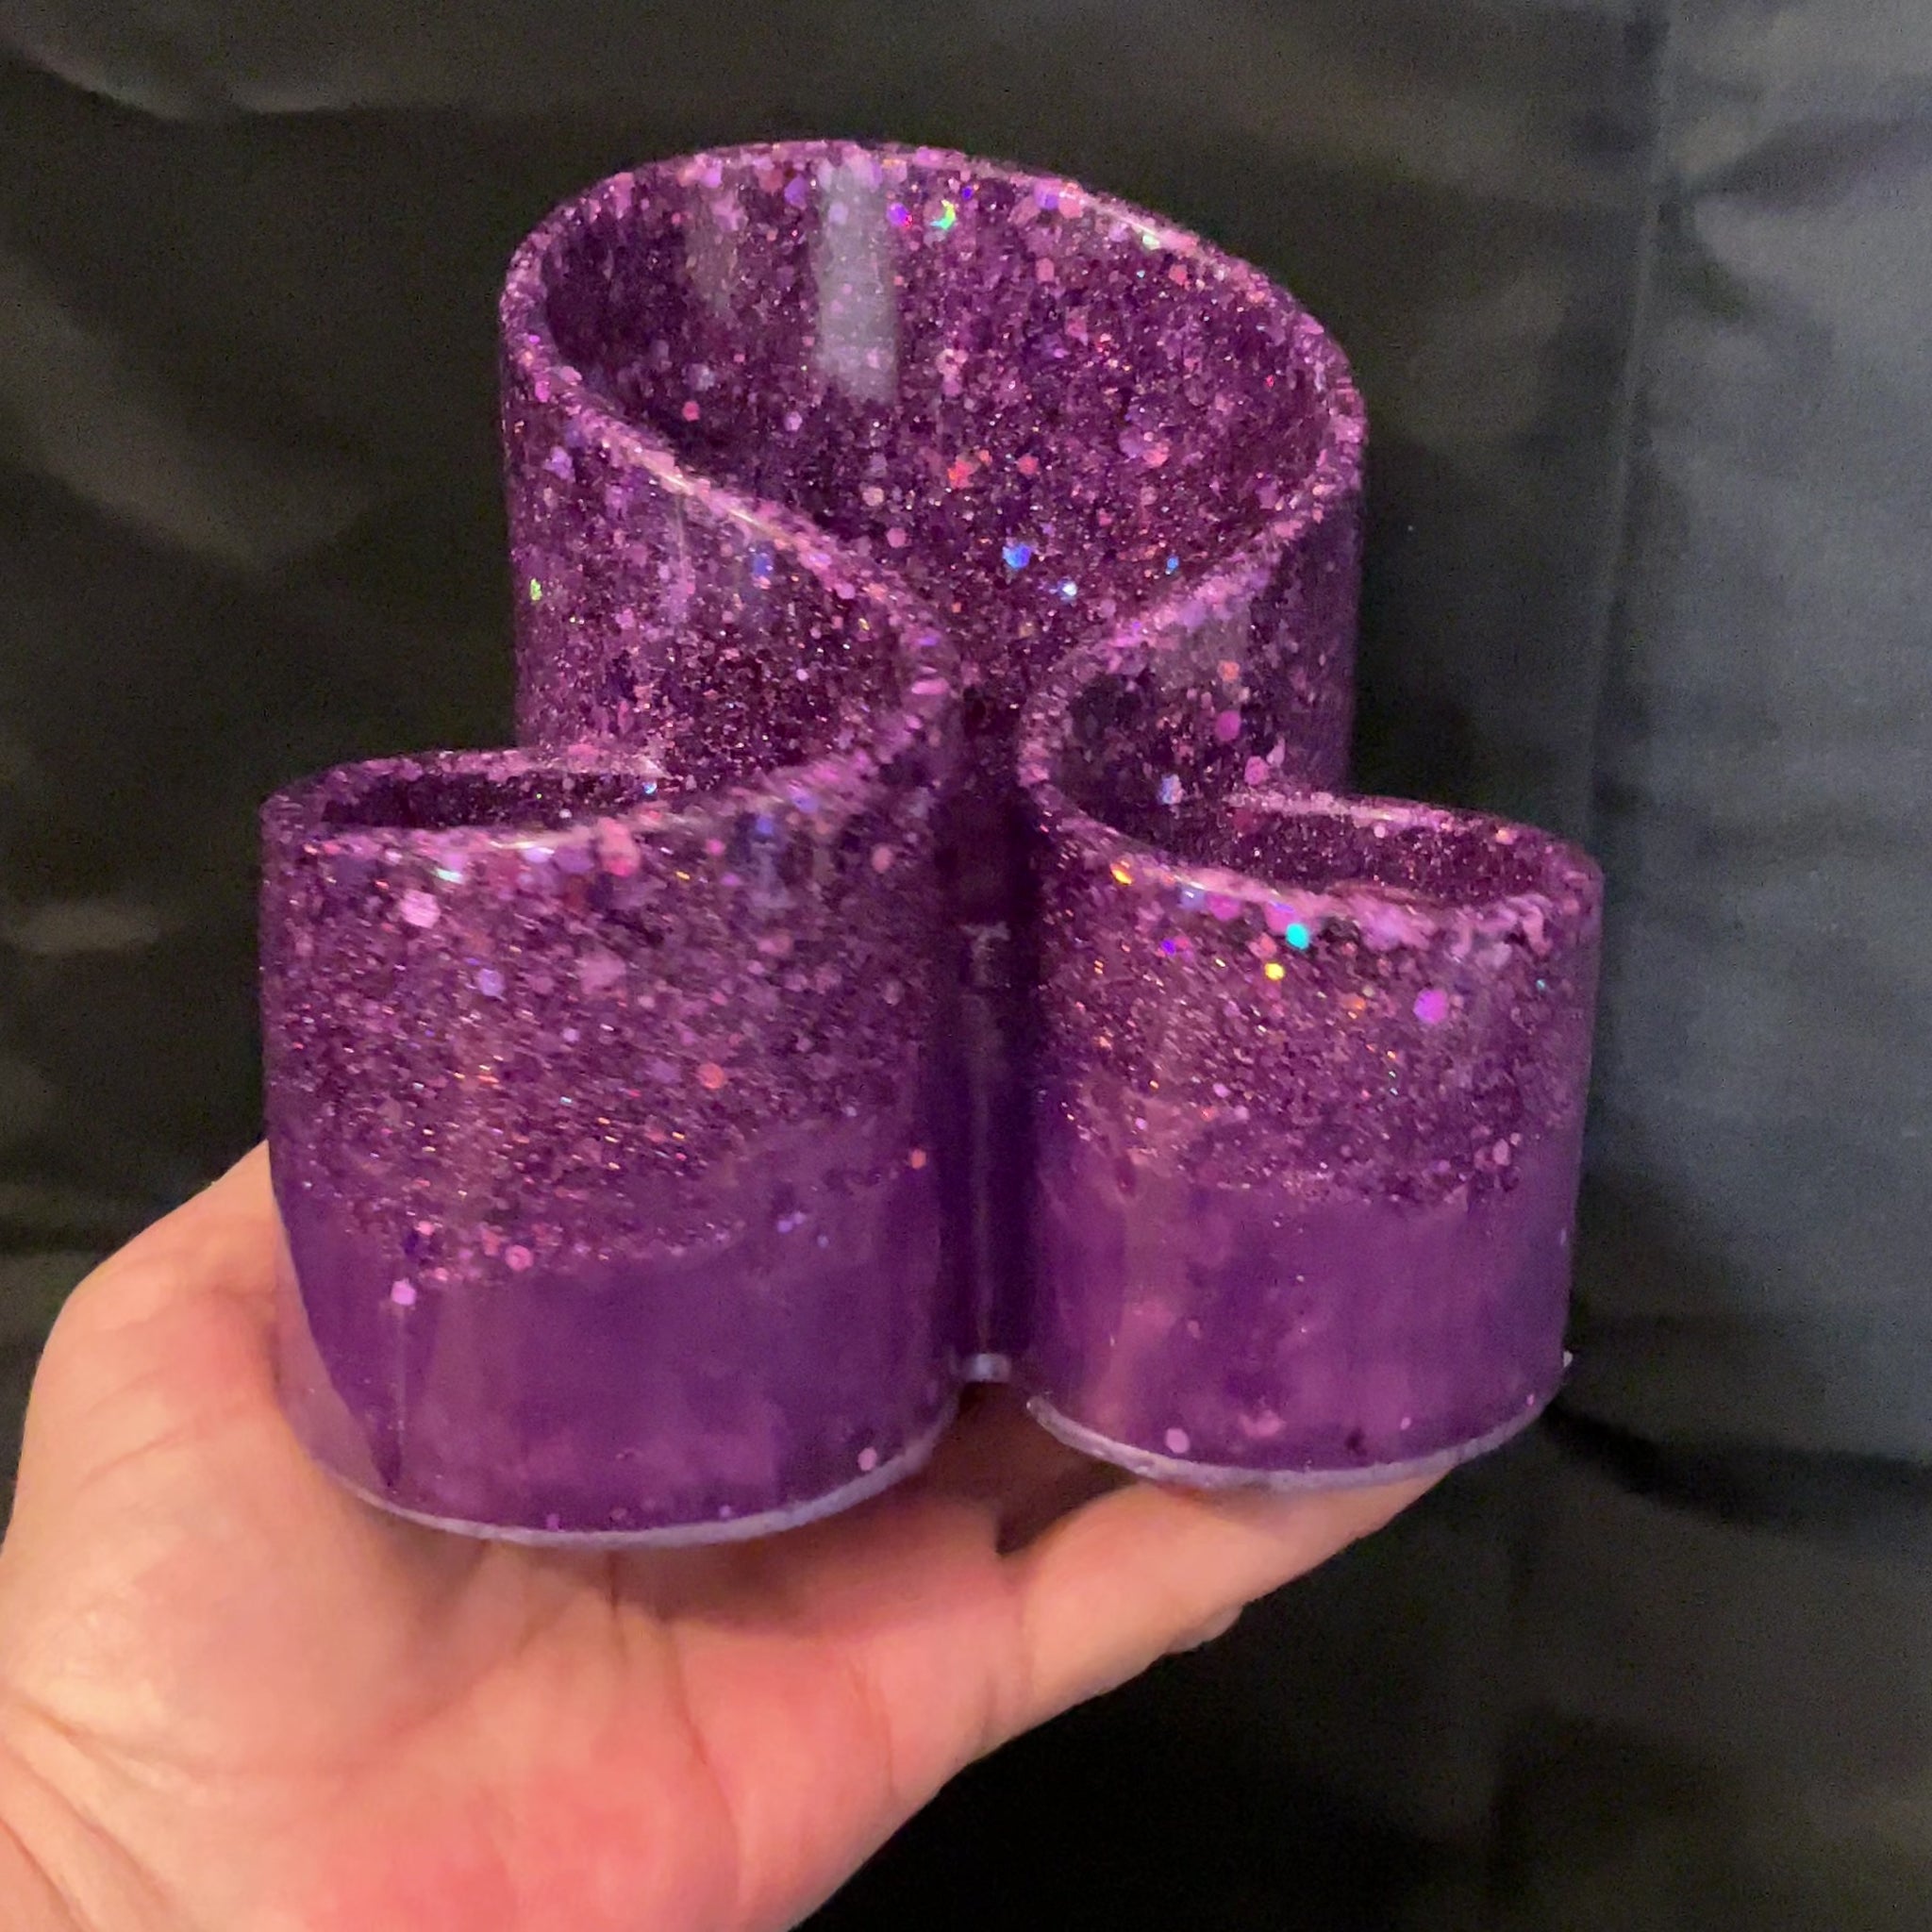 Handmade Resin Pearly Lilac Purple Glitter Makeup Brush Holder showing how the glitter sparkles in the light.